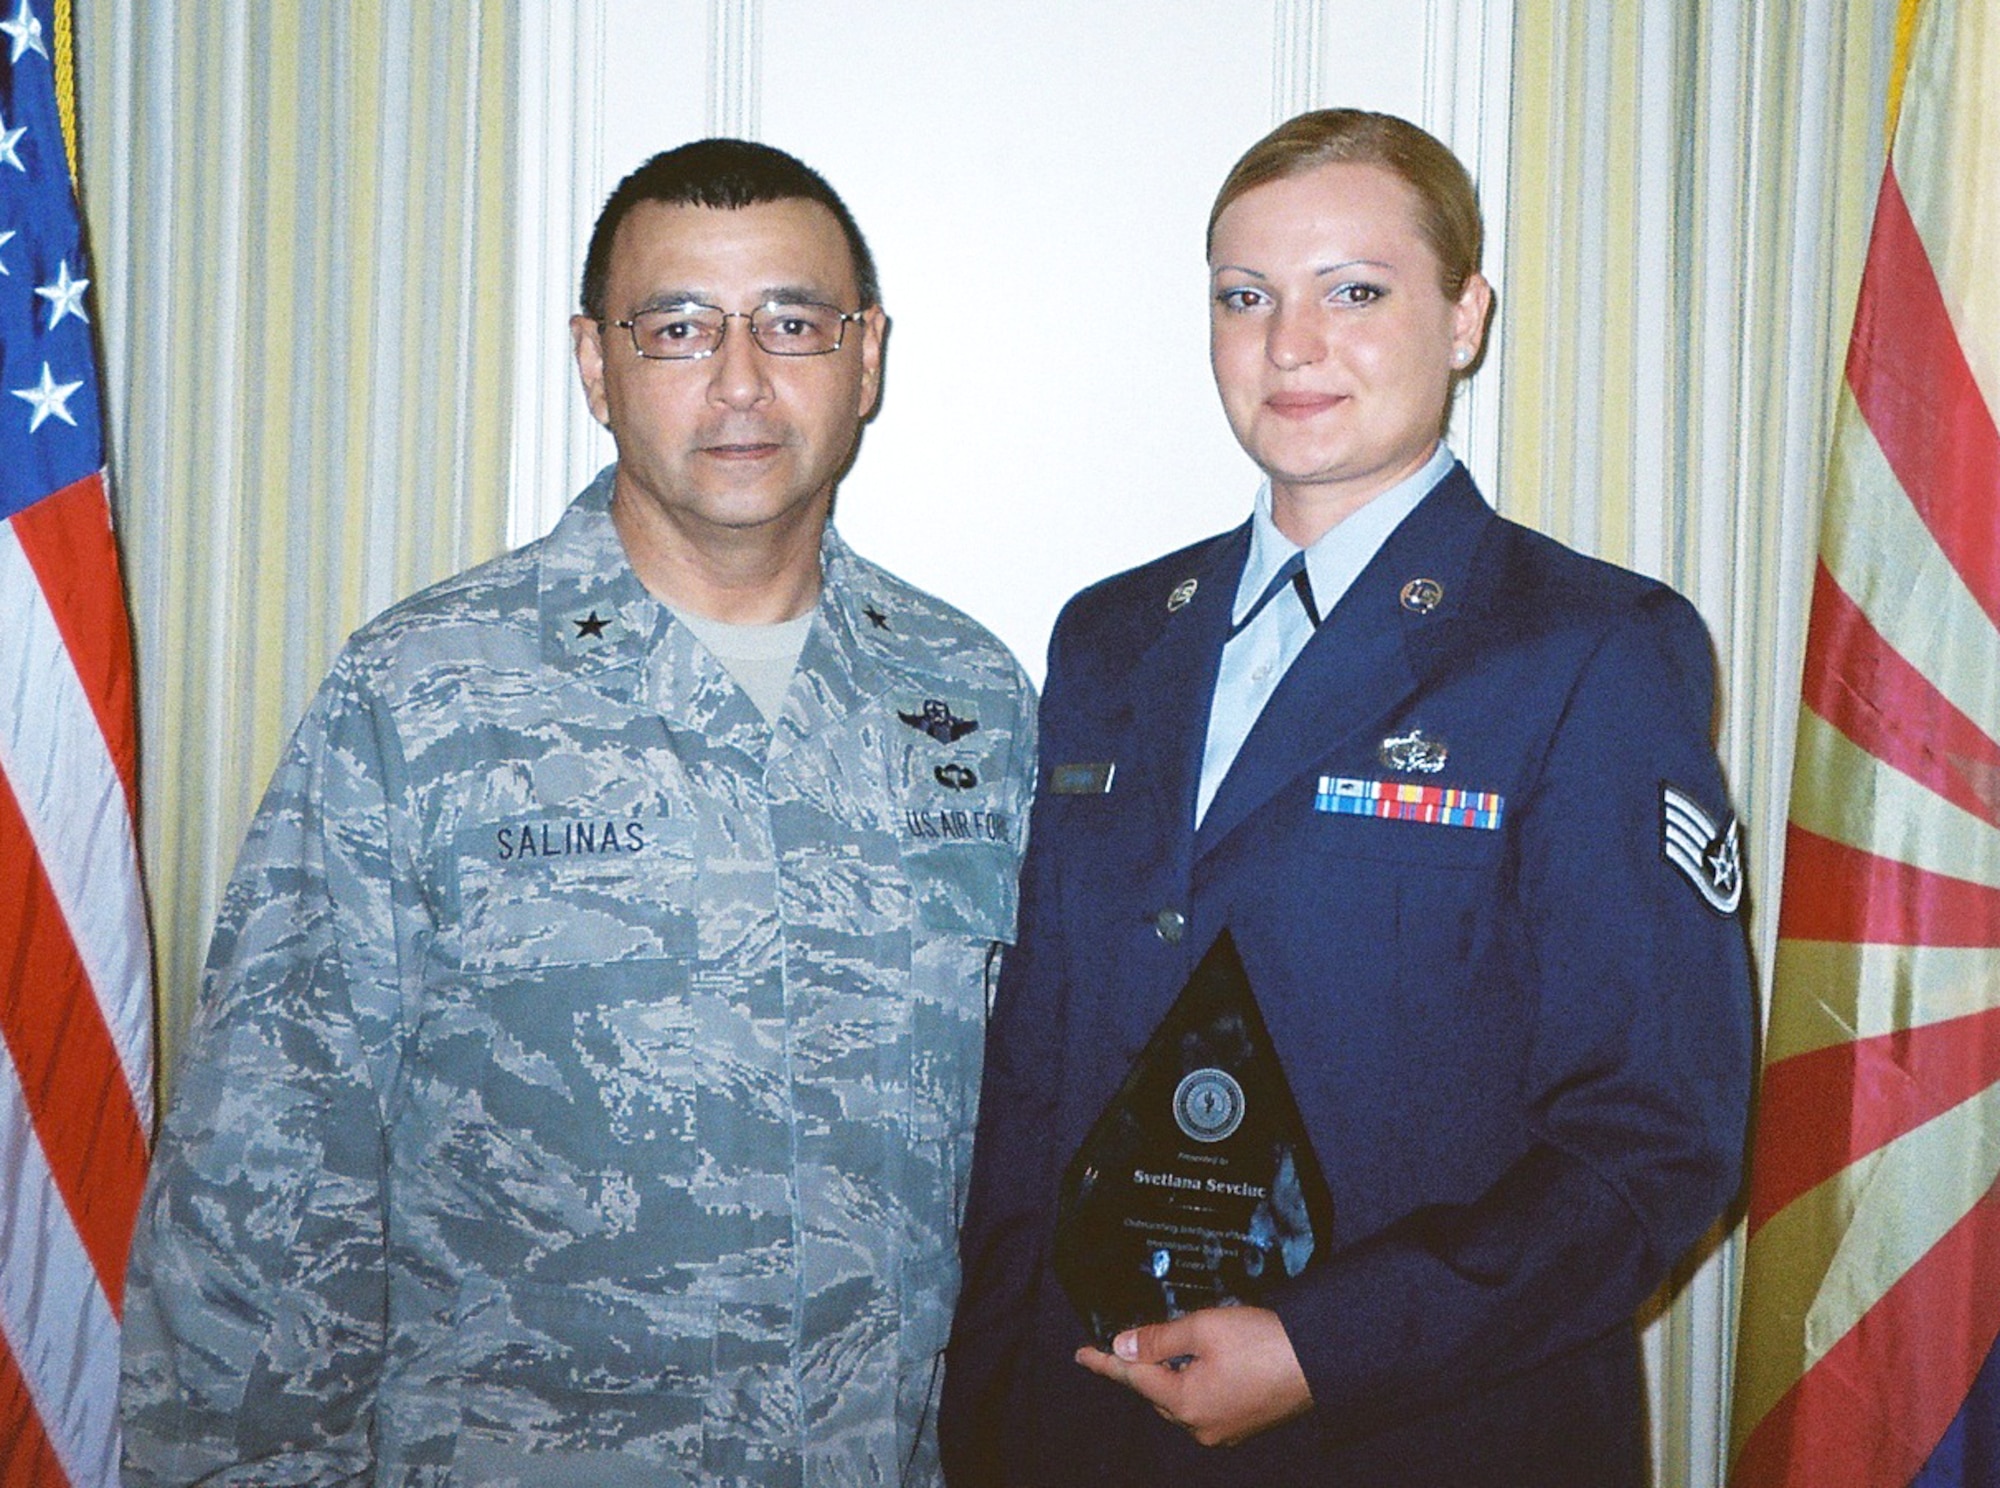 U.S. Air Force Staff Sgt. Svetlana Sevciuc received the Outstanding Analyst of the Year award from the Director Joint Staff of the Air National Guard Brig. Gen. Jose Salinas. Sgt. Sevciuc of the 162nd Fighter Wing Services Squadron uses her skills as an intelligence analyst to support the Arizona Joint Counter Narcotic-Terrorism Task Force mission. (U.S. Air Force photo/Released)